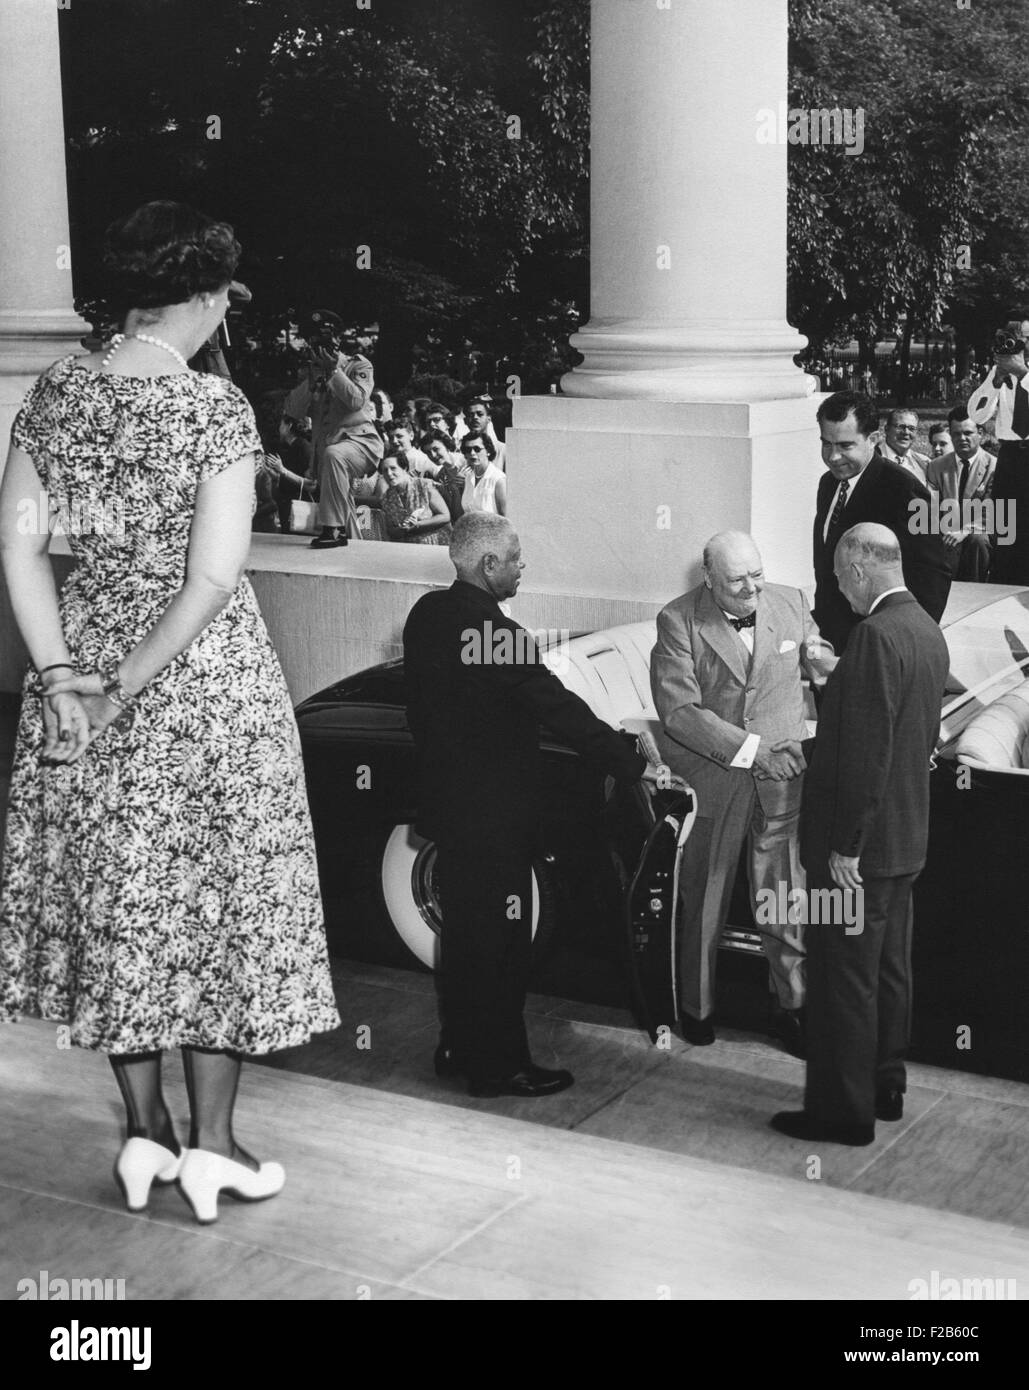 President Eisenhower welcomes Prime Minister Winston Churchill of Britain at the White House. First Lady Mamie Eisenhower stands at top of stairs. Richard Nixon is in the car. June 25, 1954. - (BSLOC 2014 16 202) Stock Photo